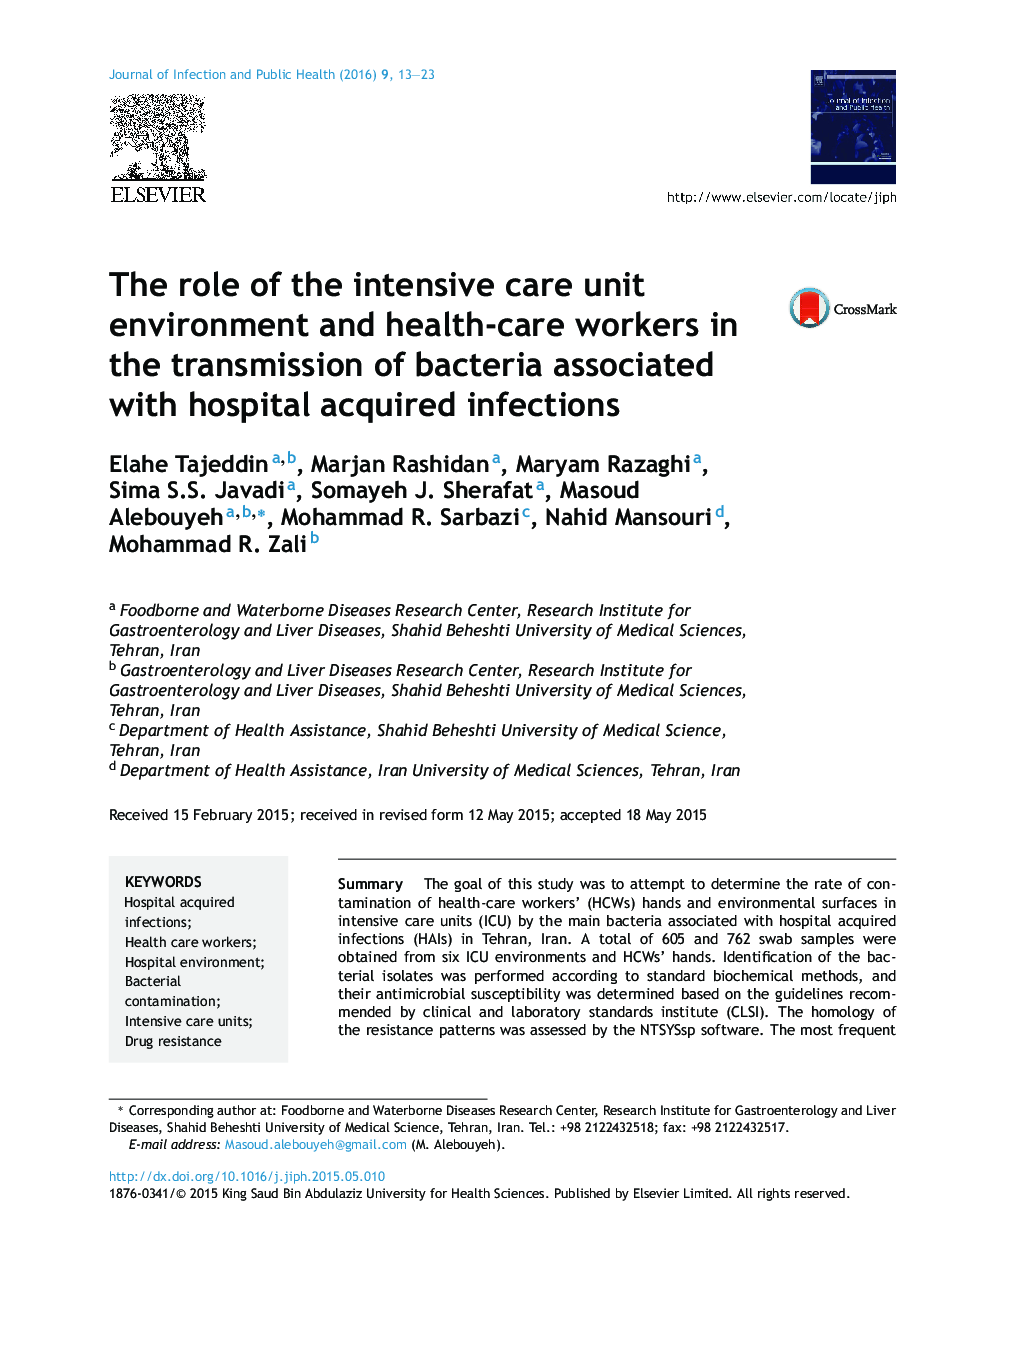 The role of the intensive care unit environment and health-care workers in the transmission of bacteria associated with hospital acquired infections